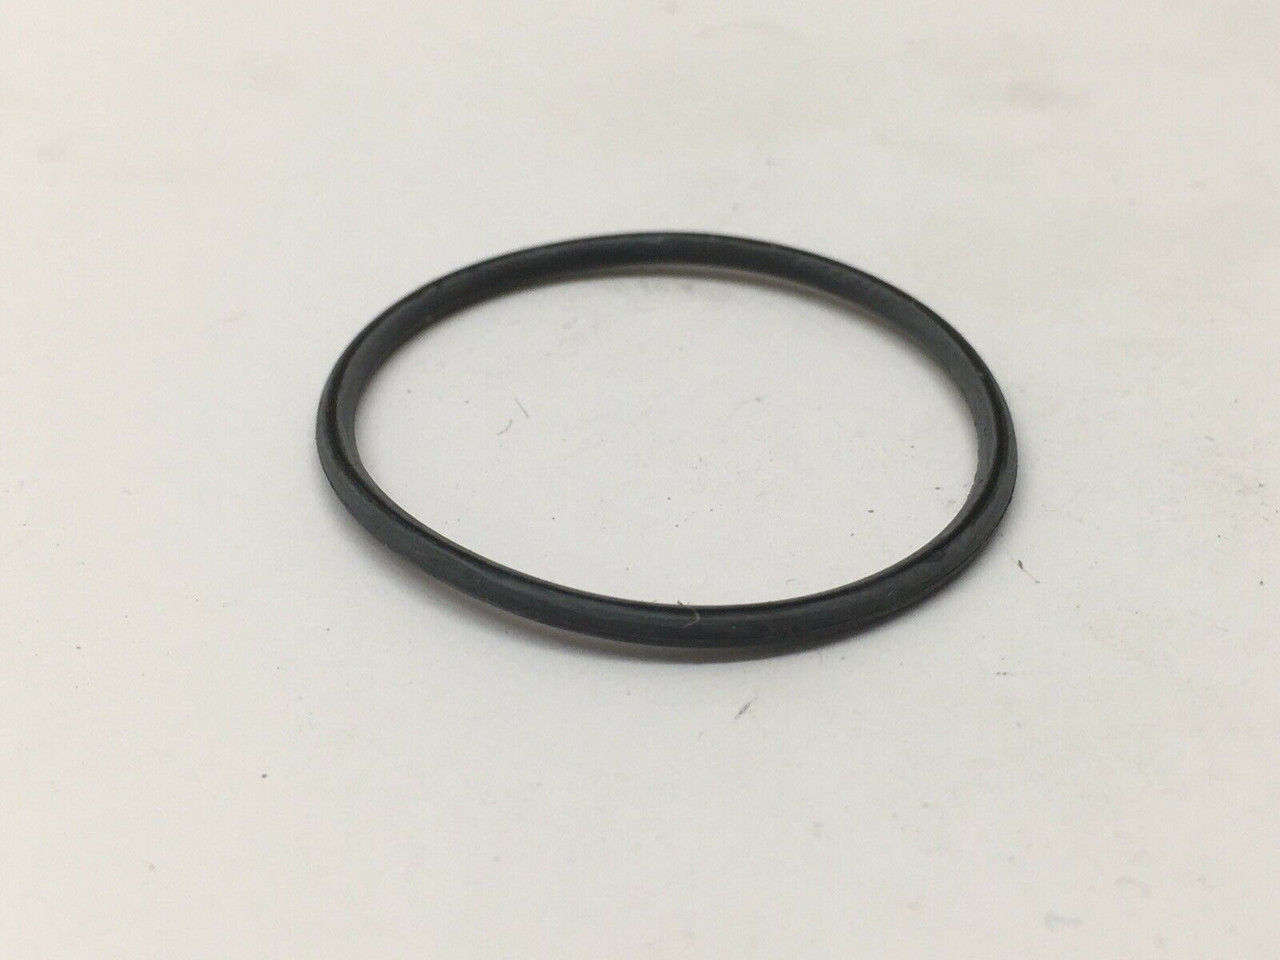 Packing Performed O-Ring M83461/1-025 Wynn's Precision